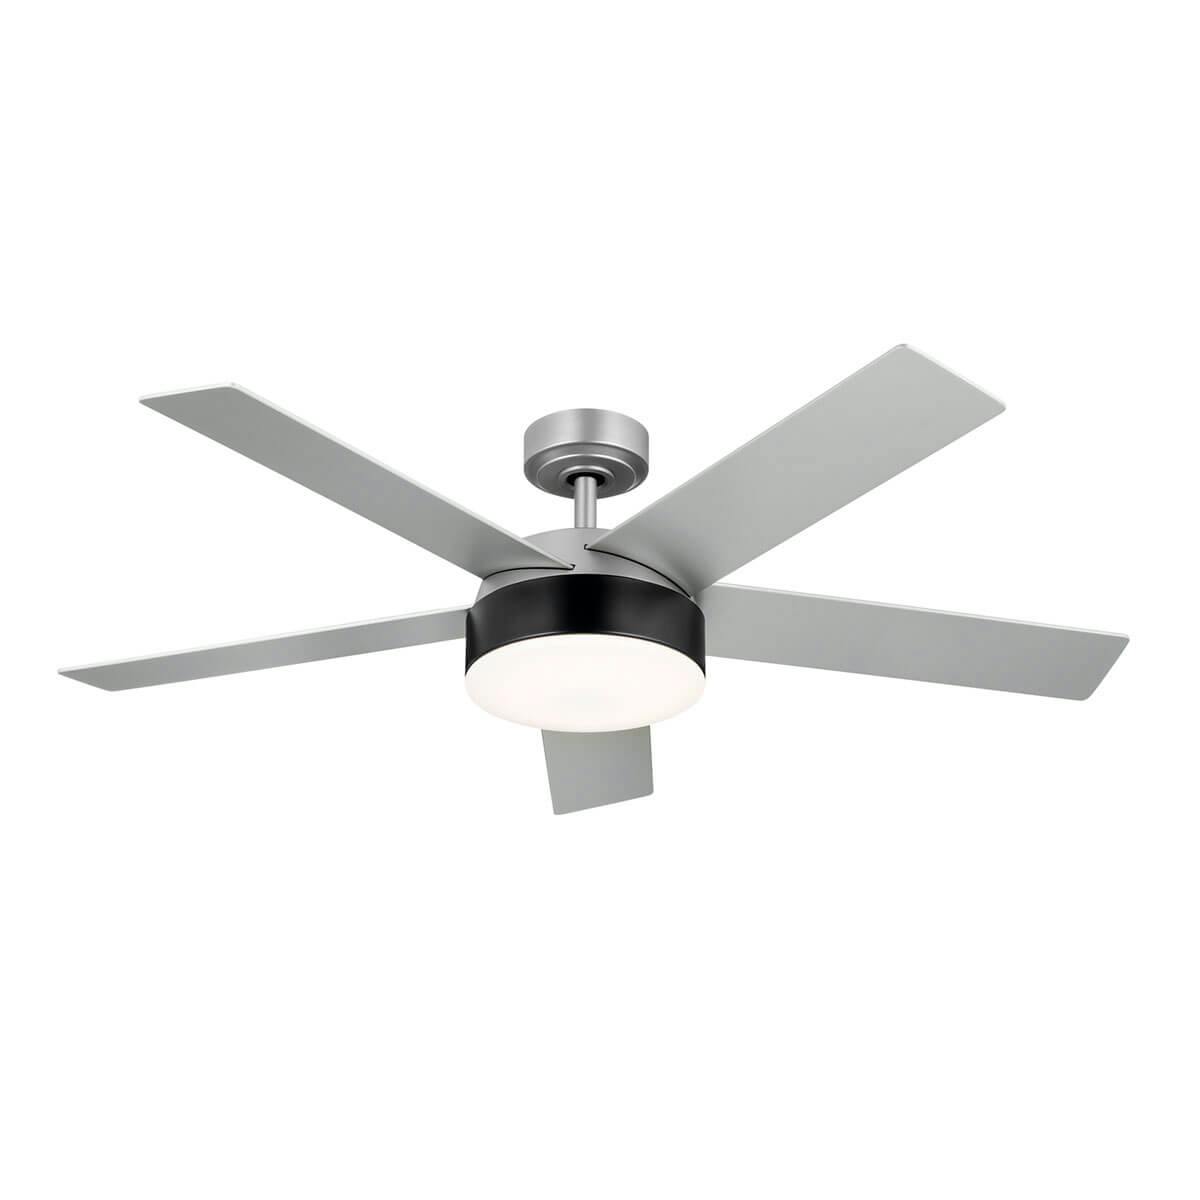 Compass 52" LED Ceiling Fan Nickel on a white background